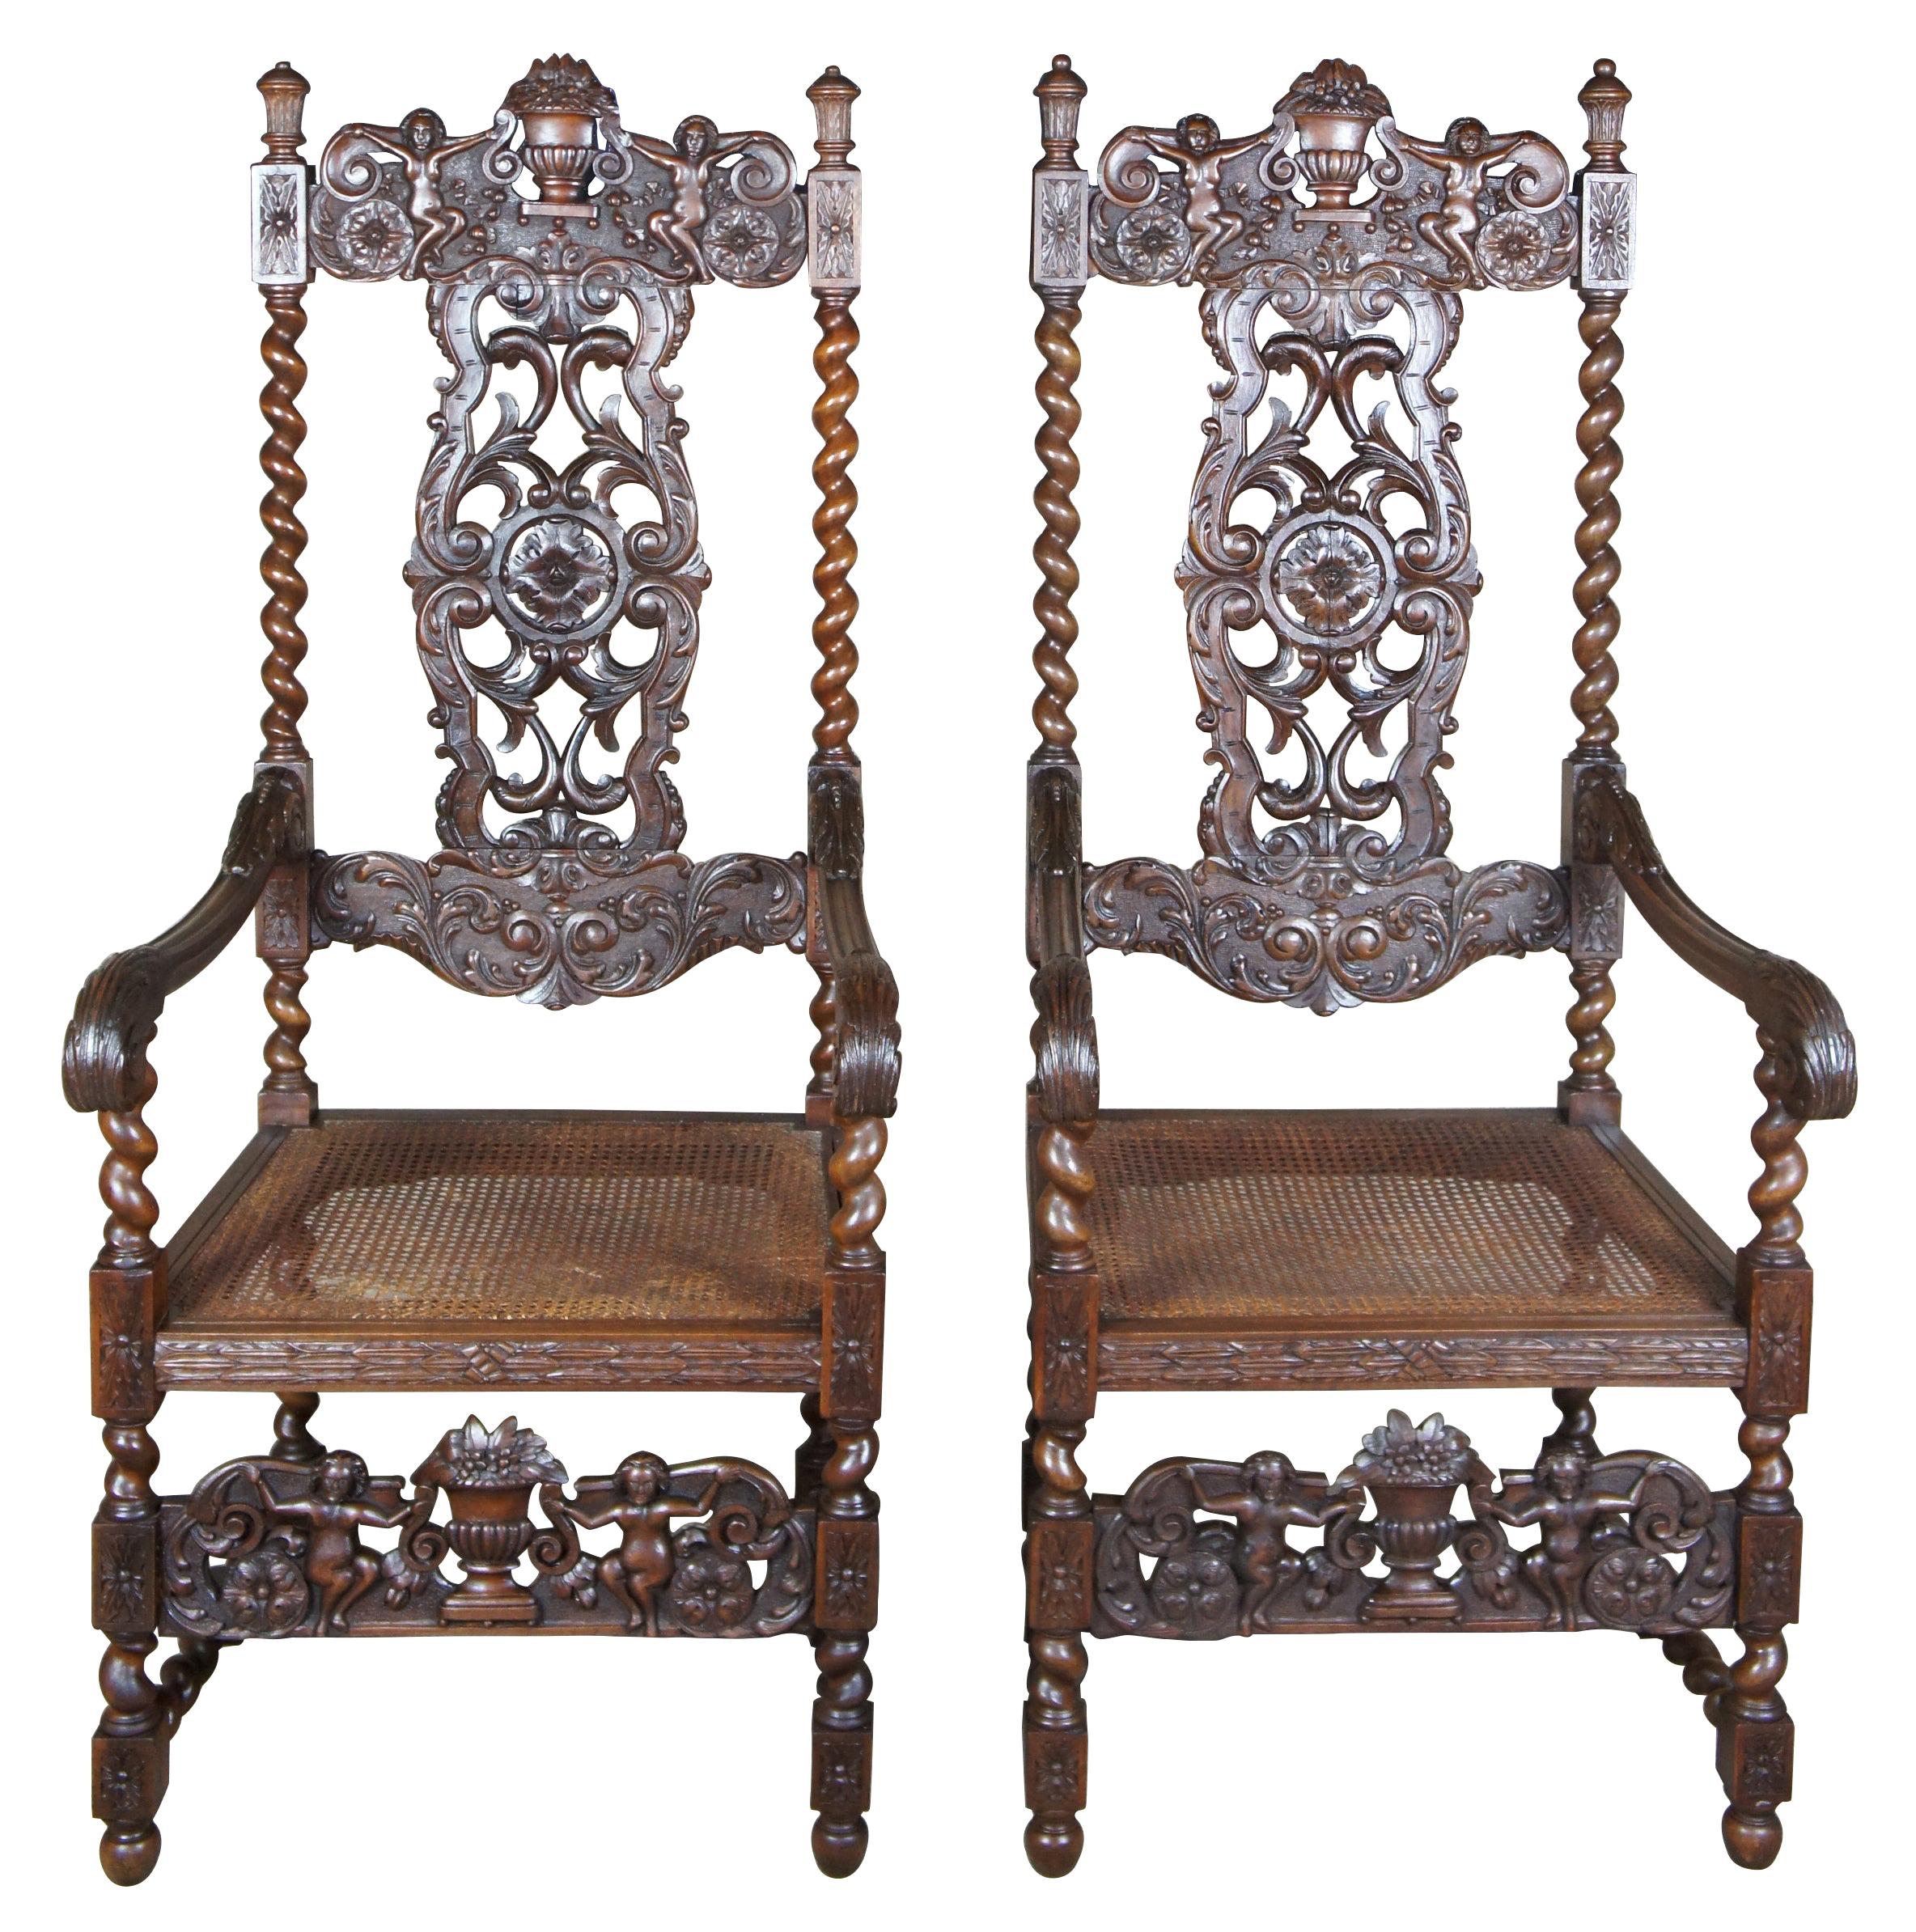 Antique Figural Carved Mahogany Throne Chairs Victorian Gothic Spanish Revival